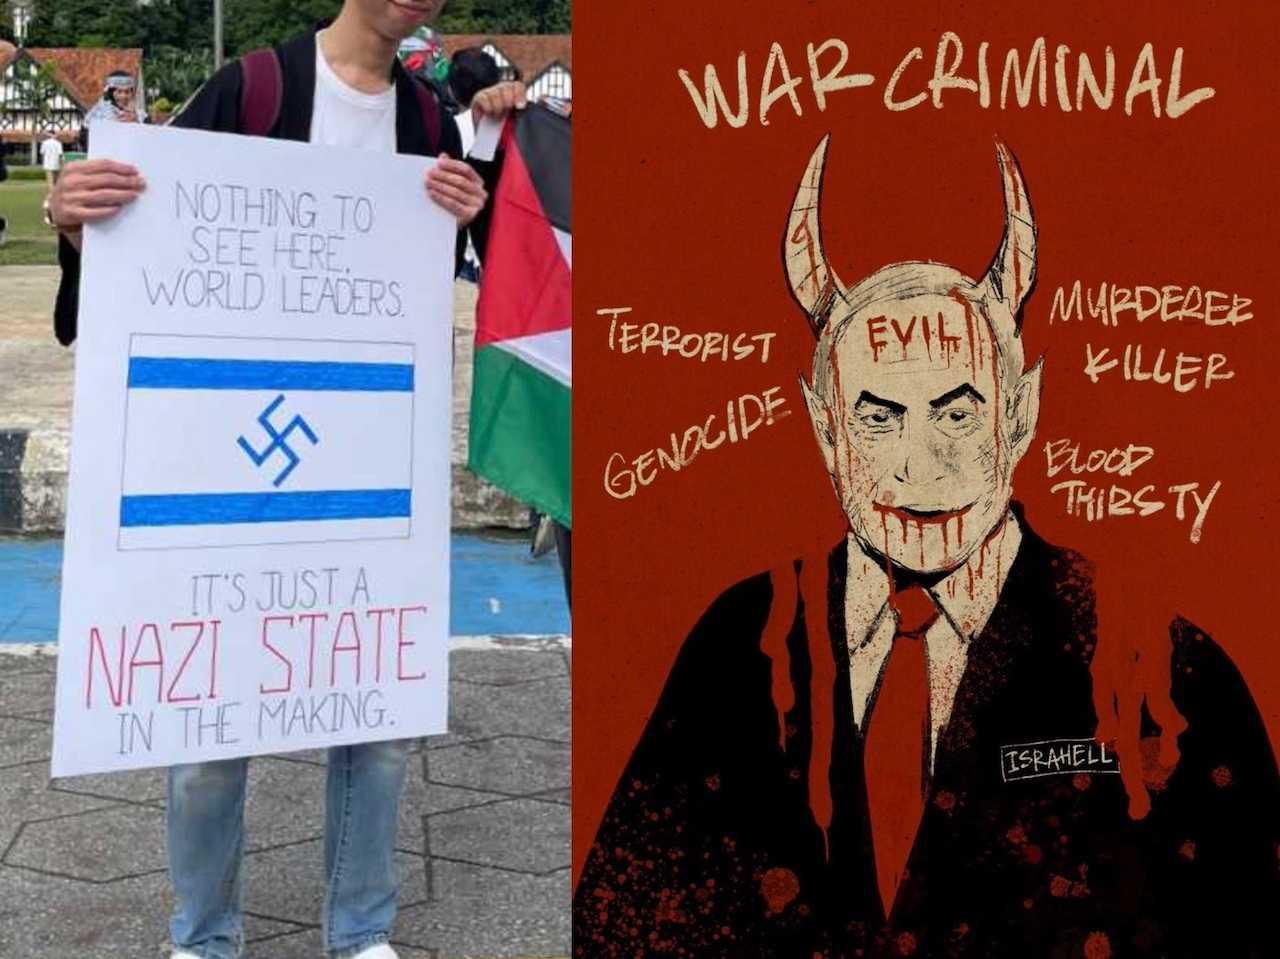 Some of the posters banned by the organisers of a pro-Palestine rally in Kuala Lumpur on Sunday. Many have questioned whether a government rally tonight will likewise bar such images. 
